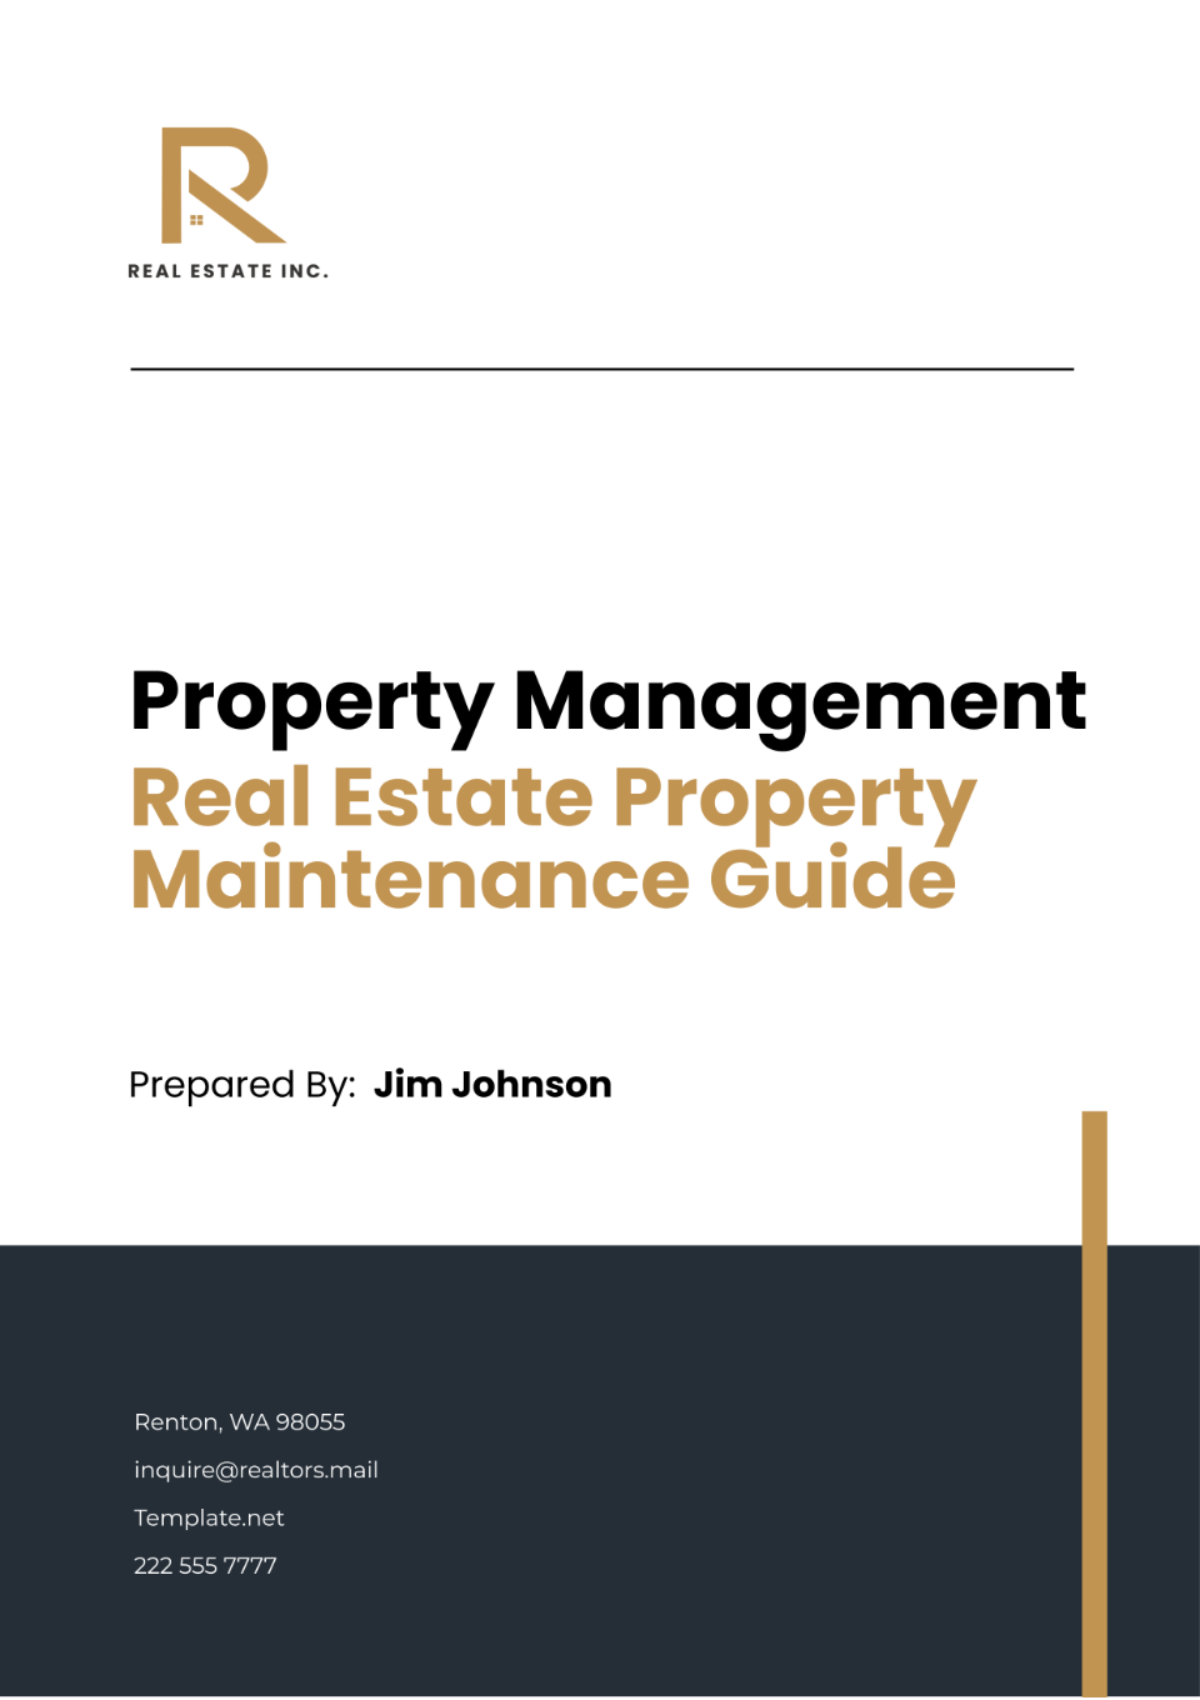 Real Estate Property Maintenance Guide Template